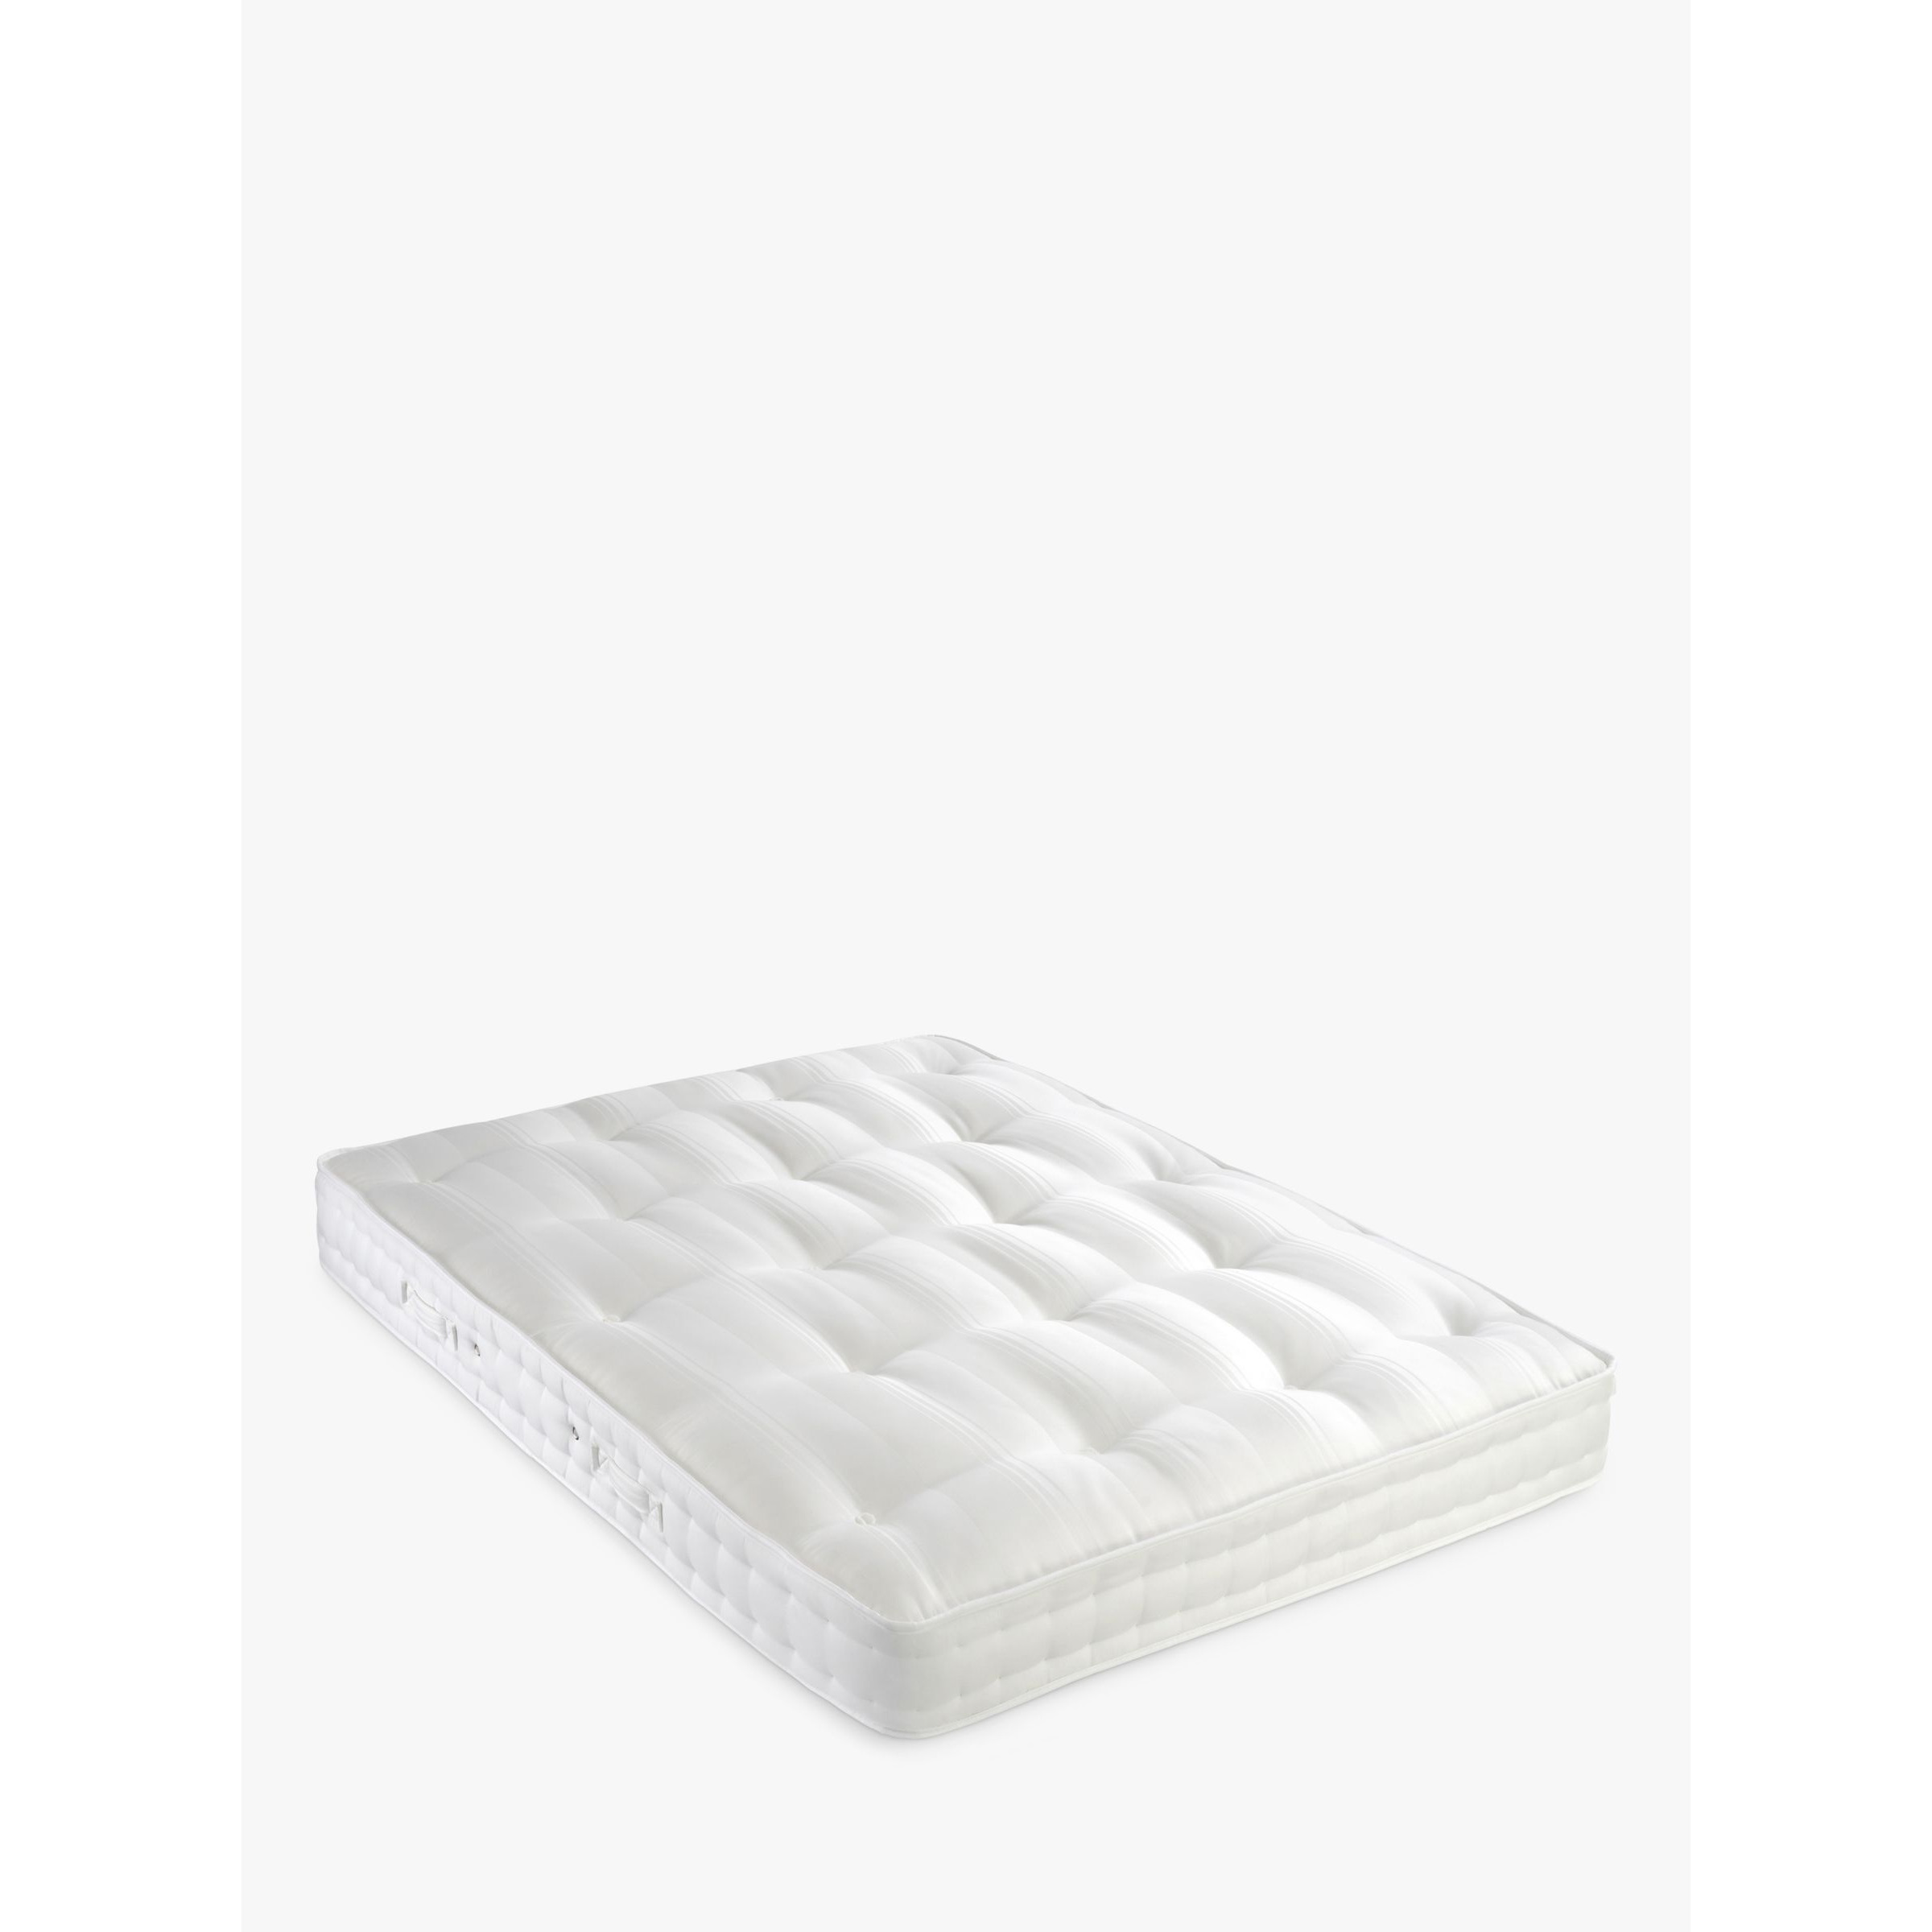 John Lewis Classic NO. 1 Pocket Spring Mattress, Medium/Firm Tension, Small Double - image 1